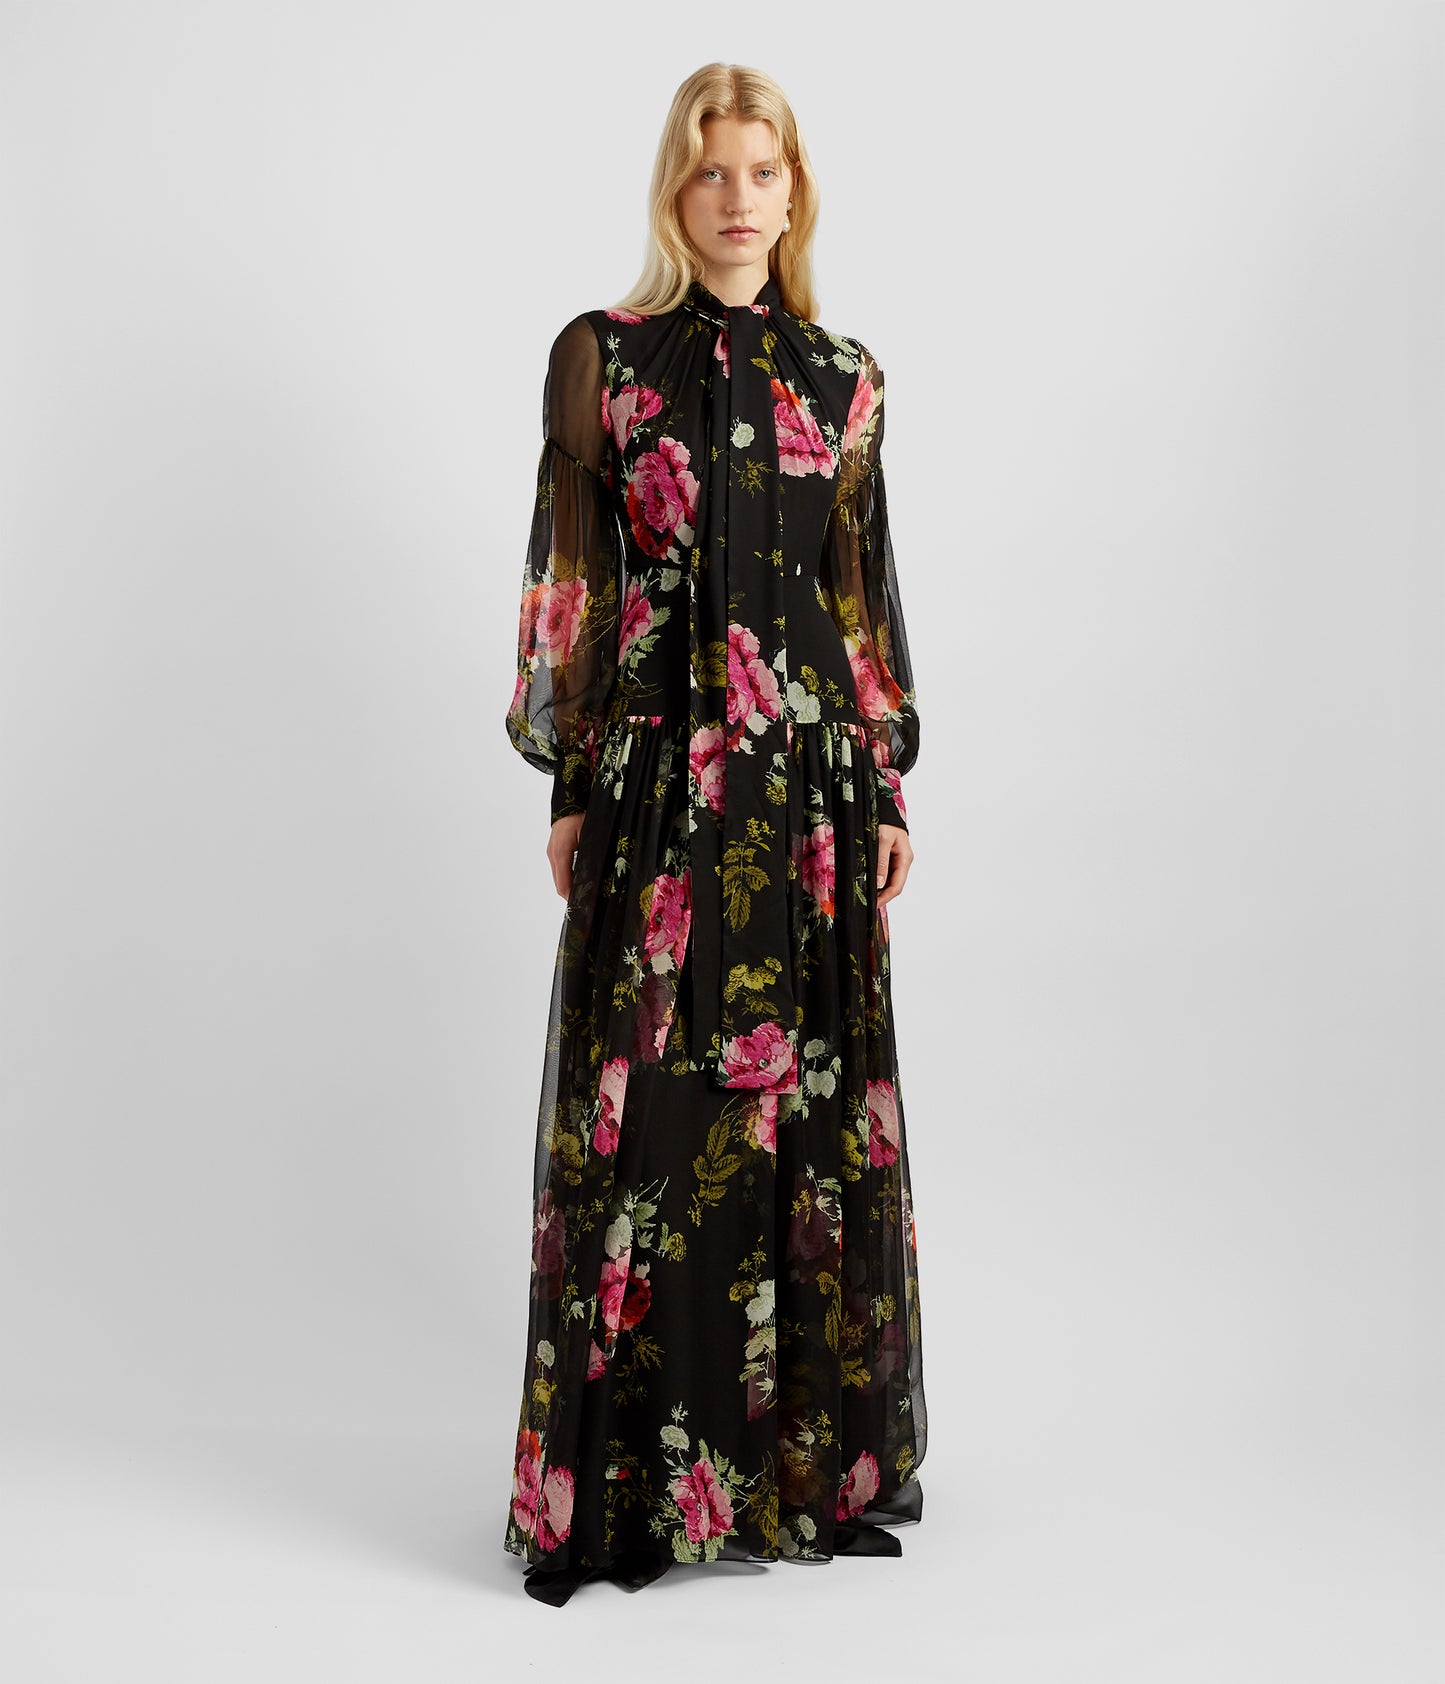 Blouson long dress in black with a pink and red rose print. The blouson long dress has a gathered tie neck, blouson sleeves and a drop waist. 